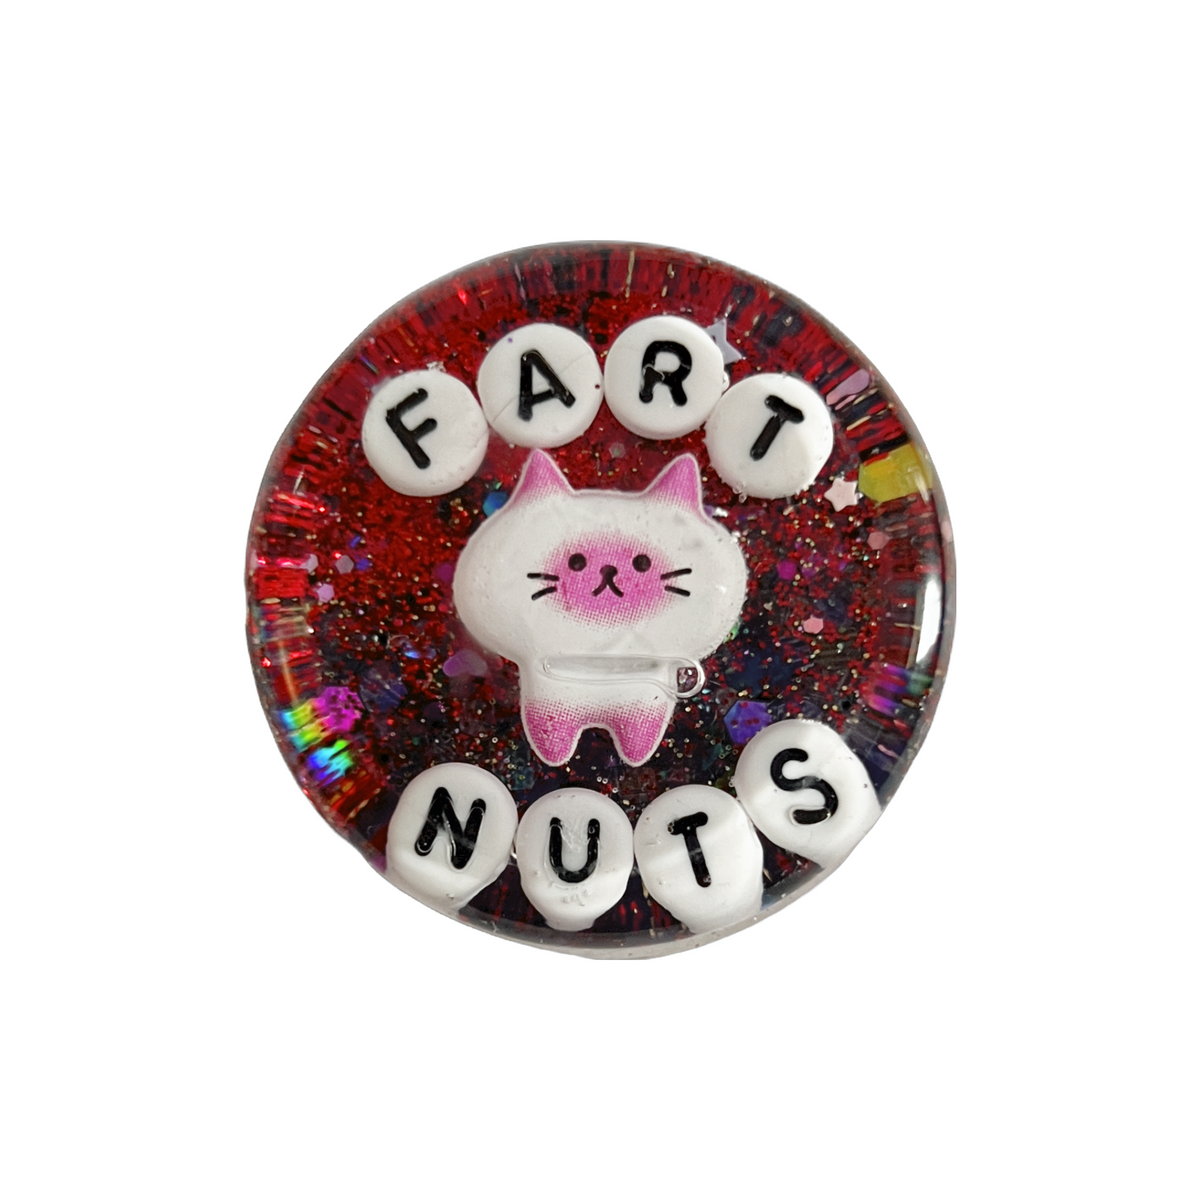 Fart Nuts - Shower Art - READY TO SHIP